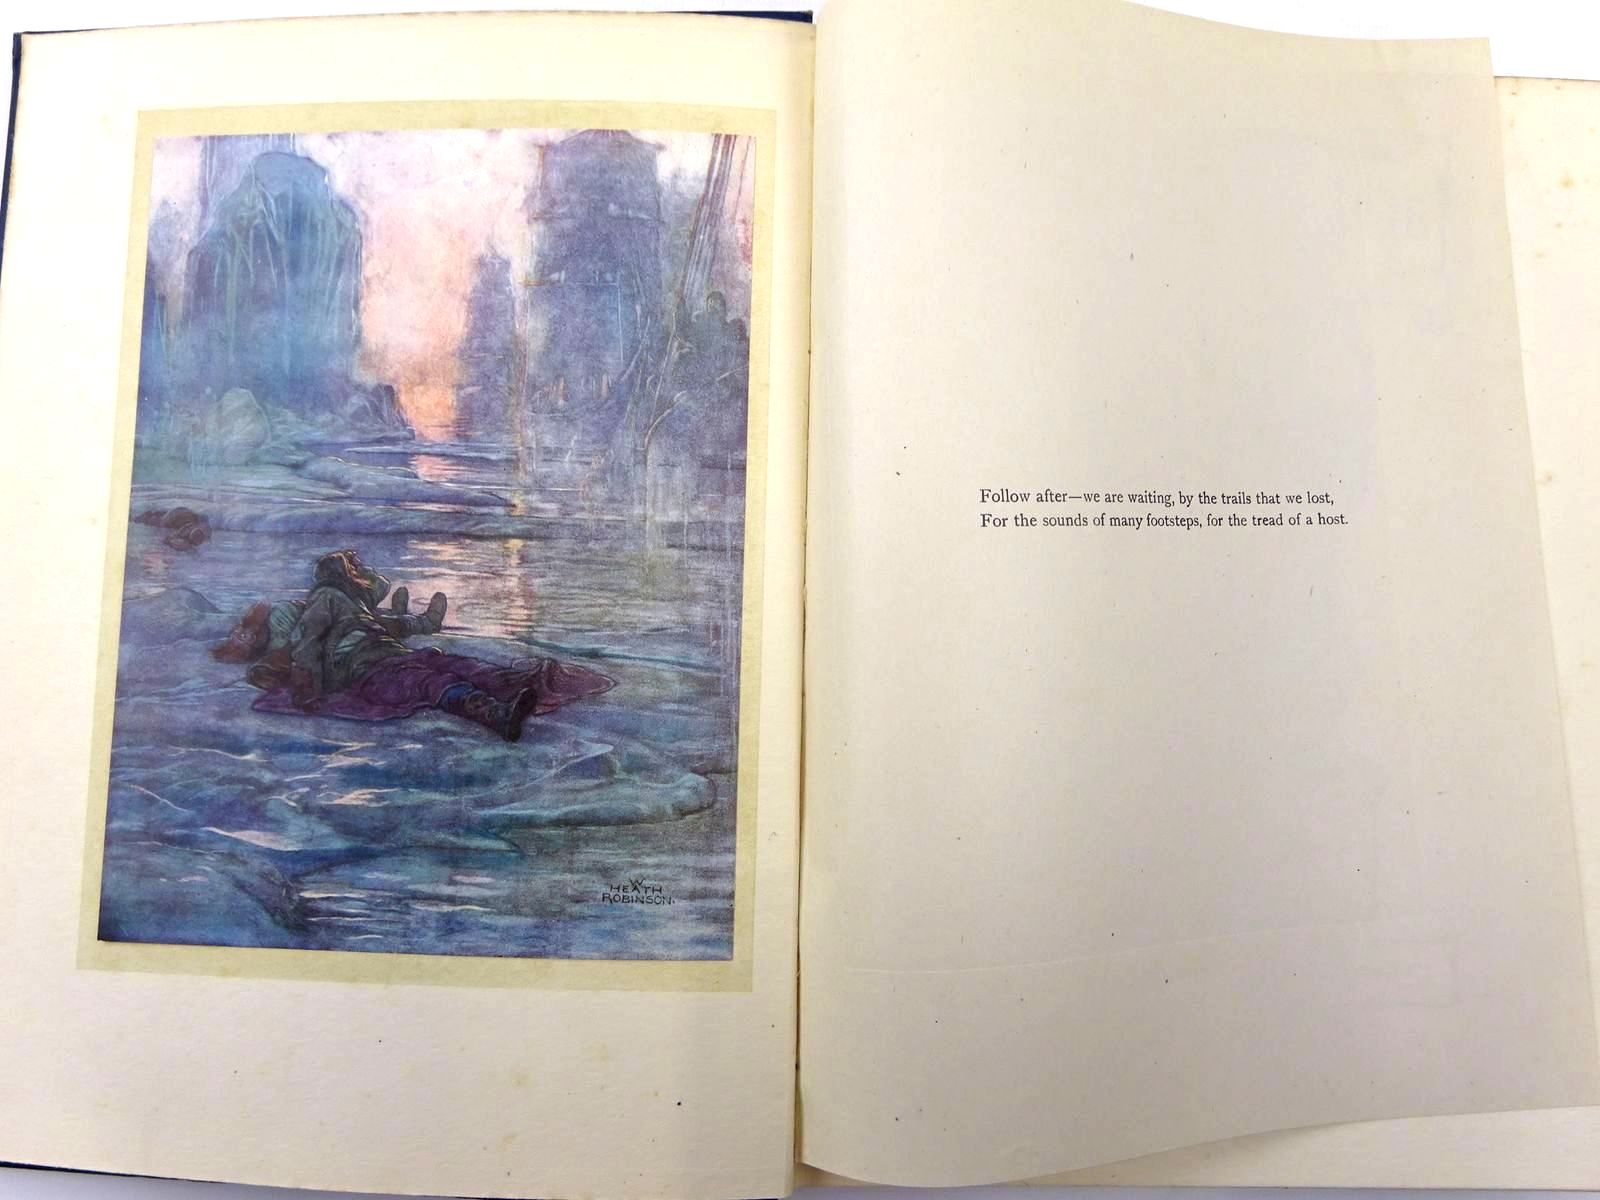 Photo of A SONG OF THE ENGLISH written by Kipling, Rudyard illustrated by Robinson, W. Heath published by Hodder & Stoughton (STOCK CODE: 2130476)  for sale by Stella & Rose's Books